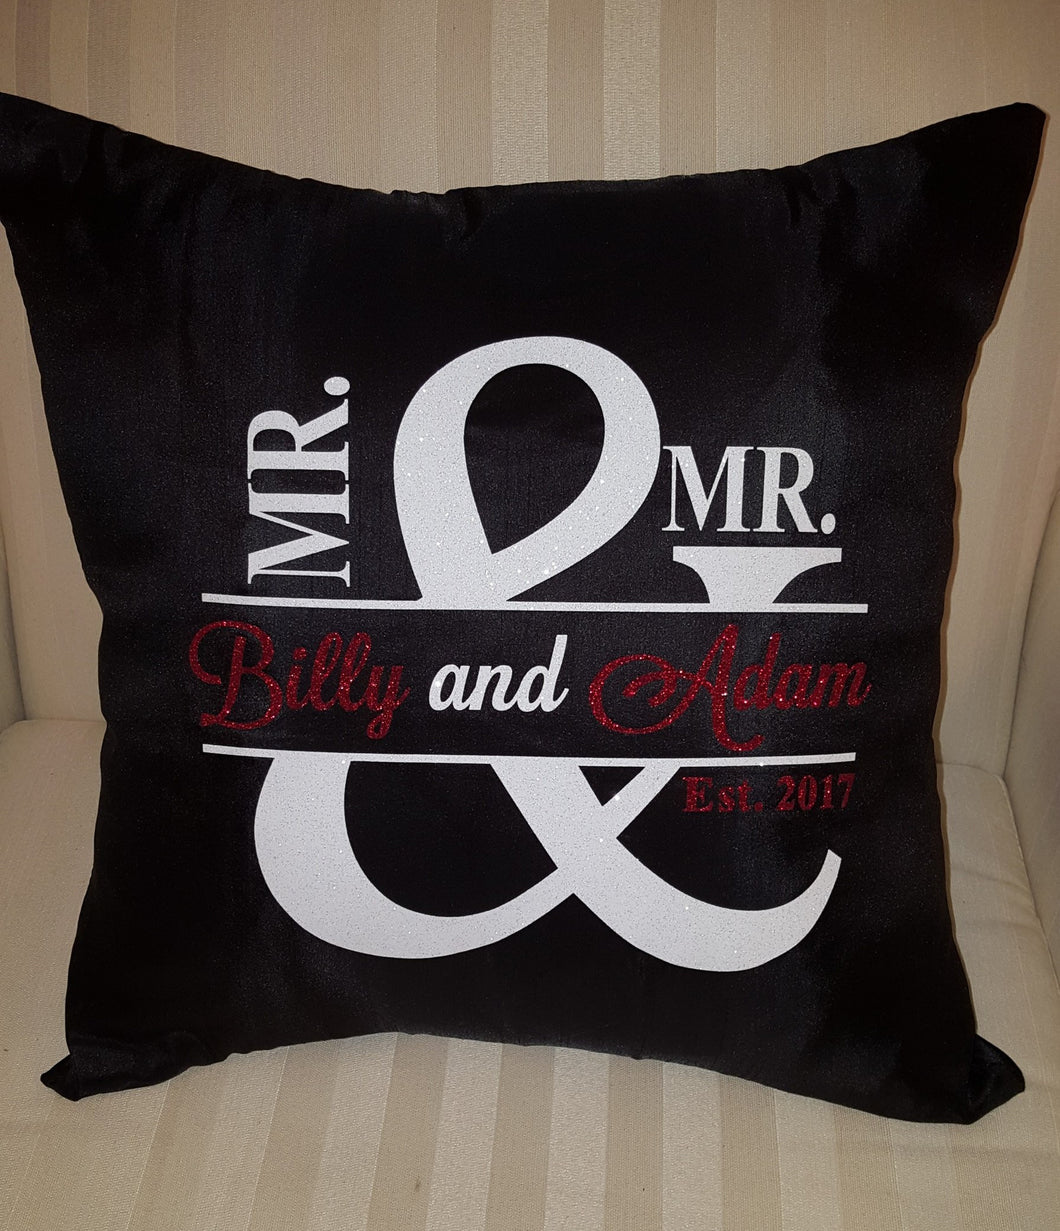 Mr and Mr(s) Pillow